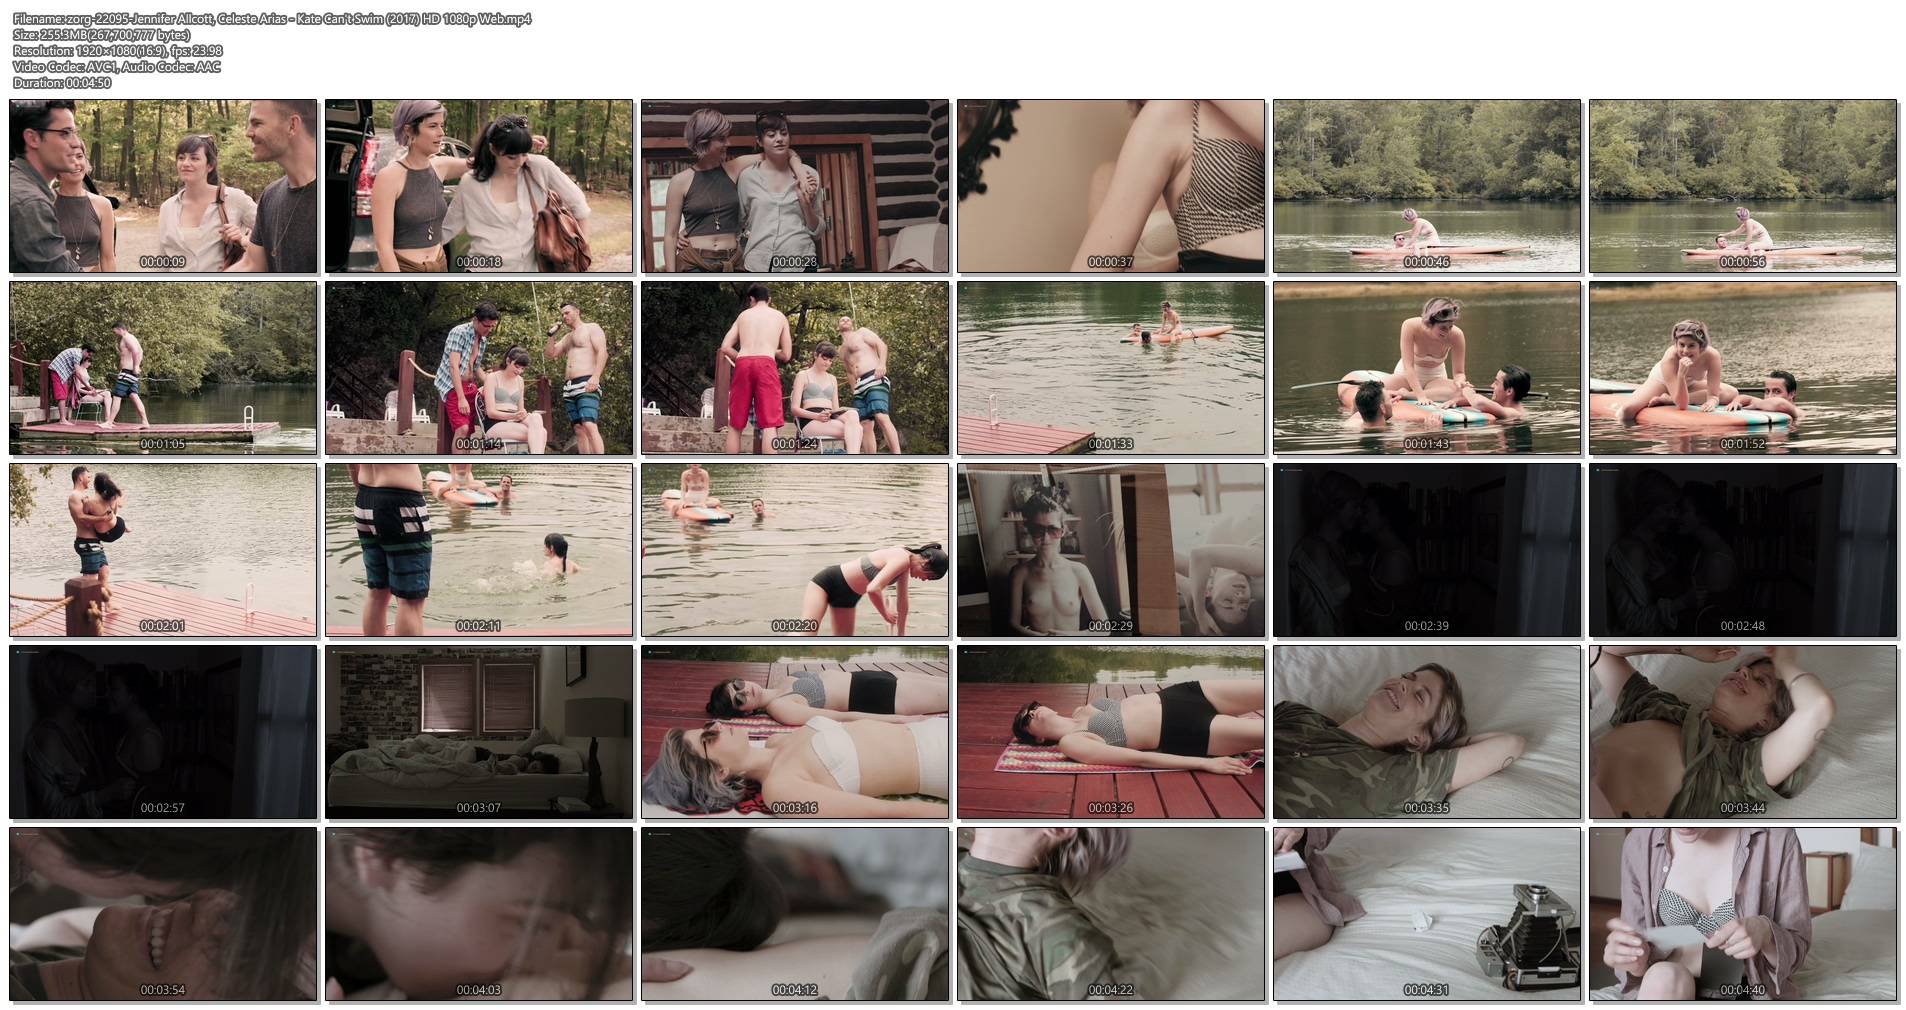 Jennifer Allcott nude topless and lesbian sex with Celeste Arias - Kate Can't Swim (2017) HD 1080p Web (1)